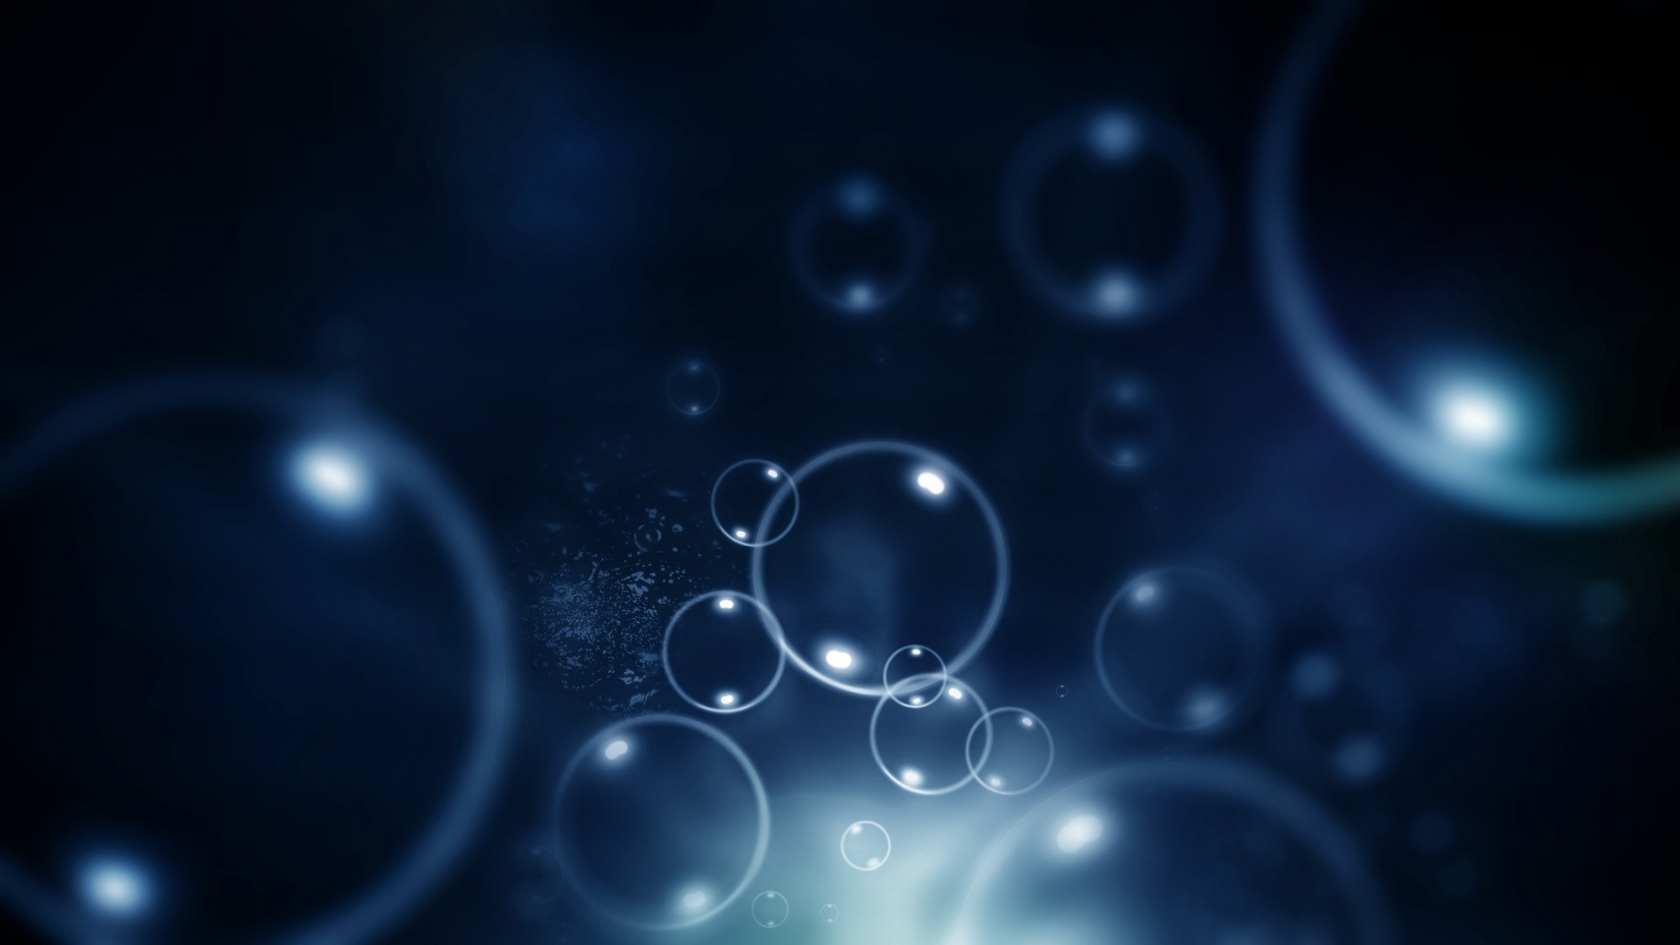 Water Bubbles for 1680 x 945 HDTV resolution